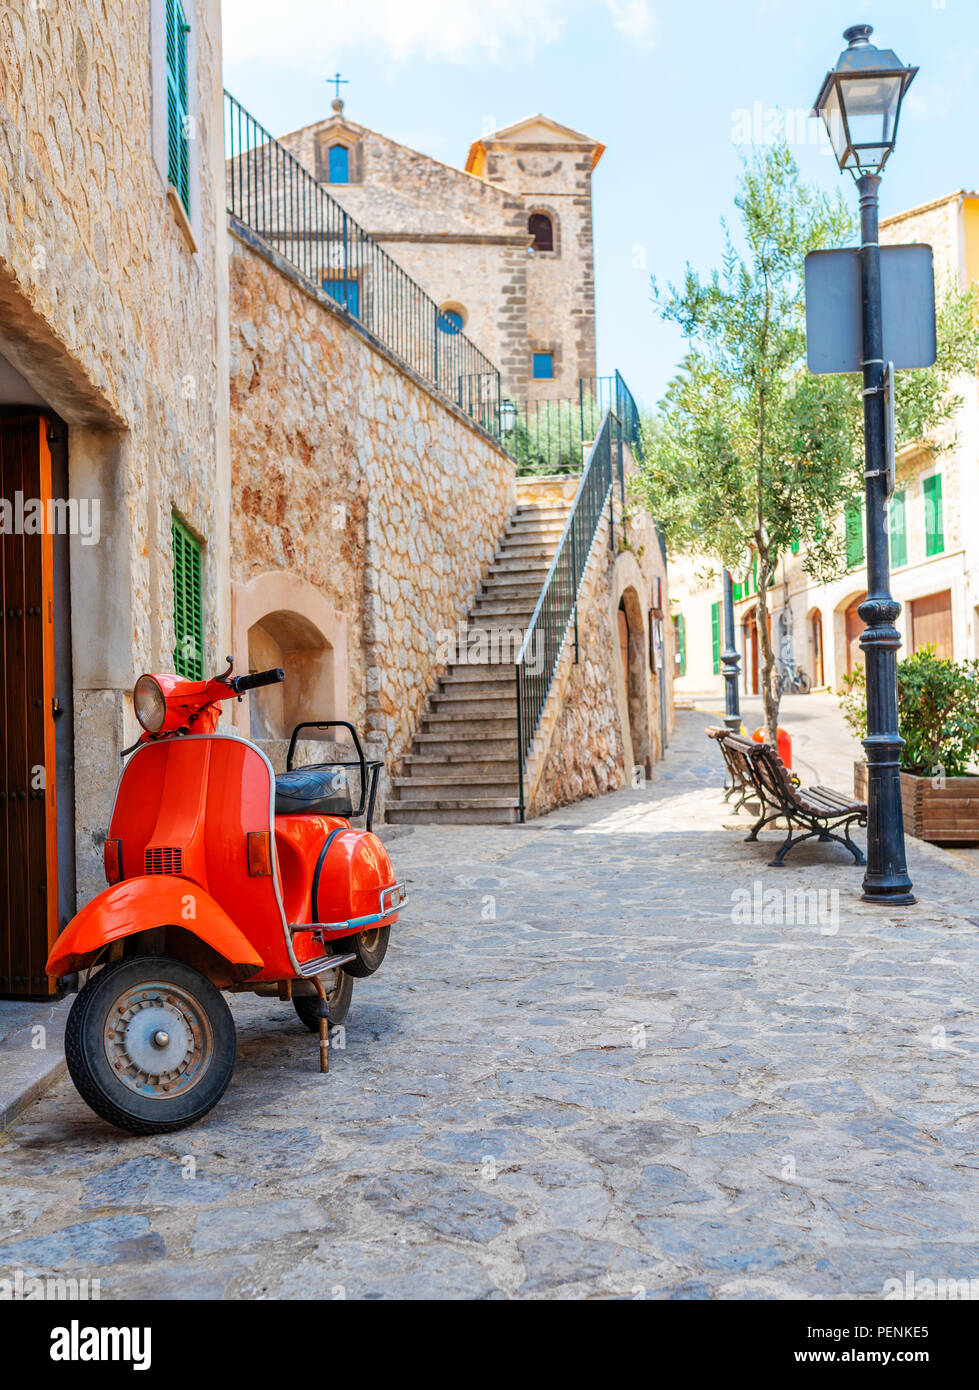 vintage red motor scooter parked in historic spanish village Stock Photo